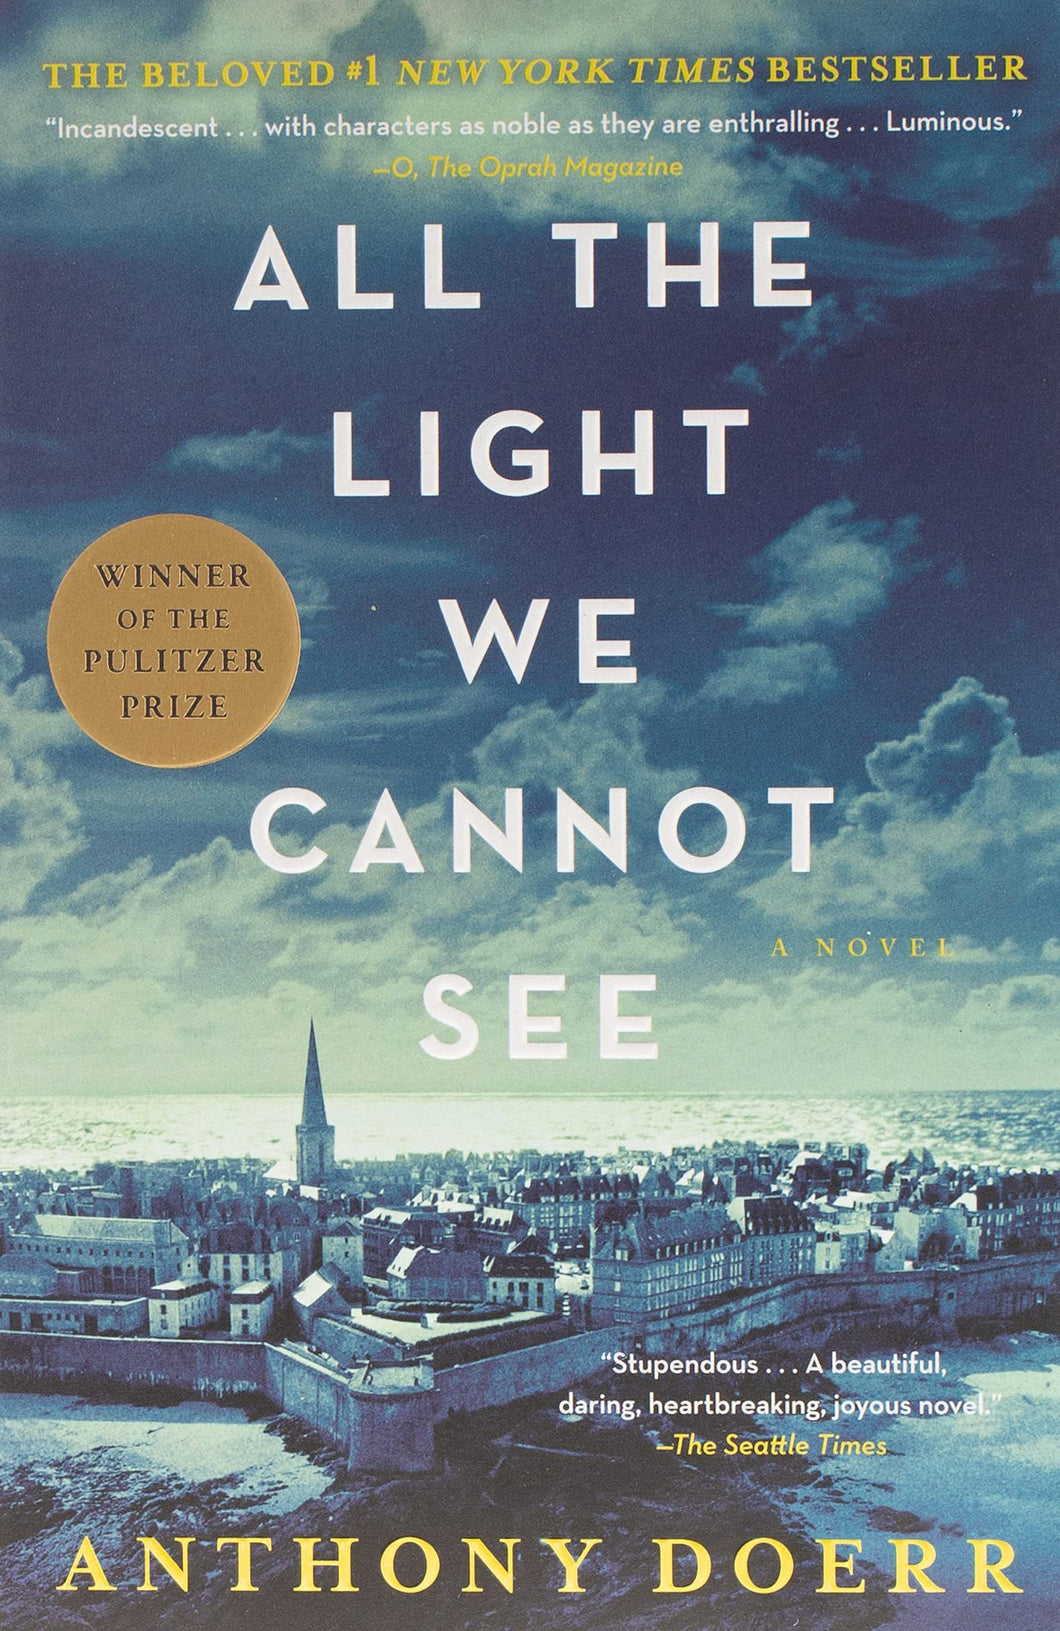 All the Light We Cannot See [Anthony Doerr]